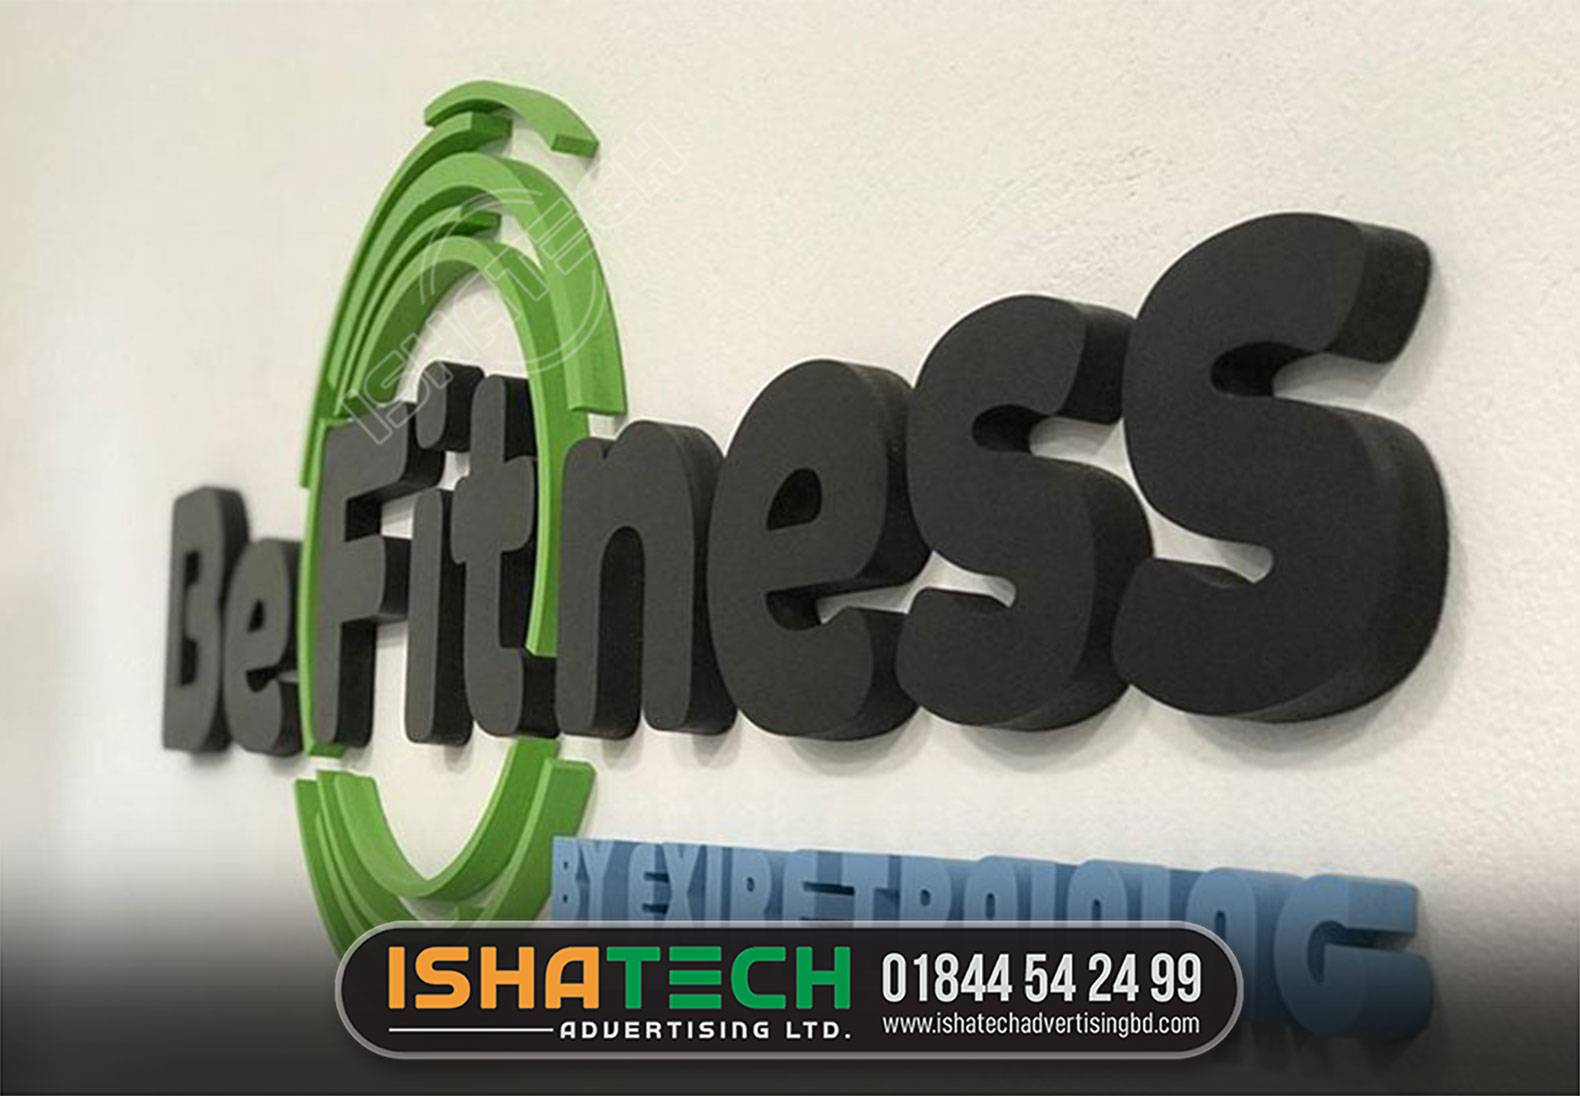 BE FITNESS OFFICE NAME PLATE, LED SIGNBOARD, OFFICE LETTER SIGNS BD, SIGNAGE MAKING COMPANY BD